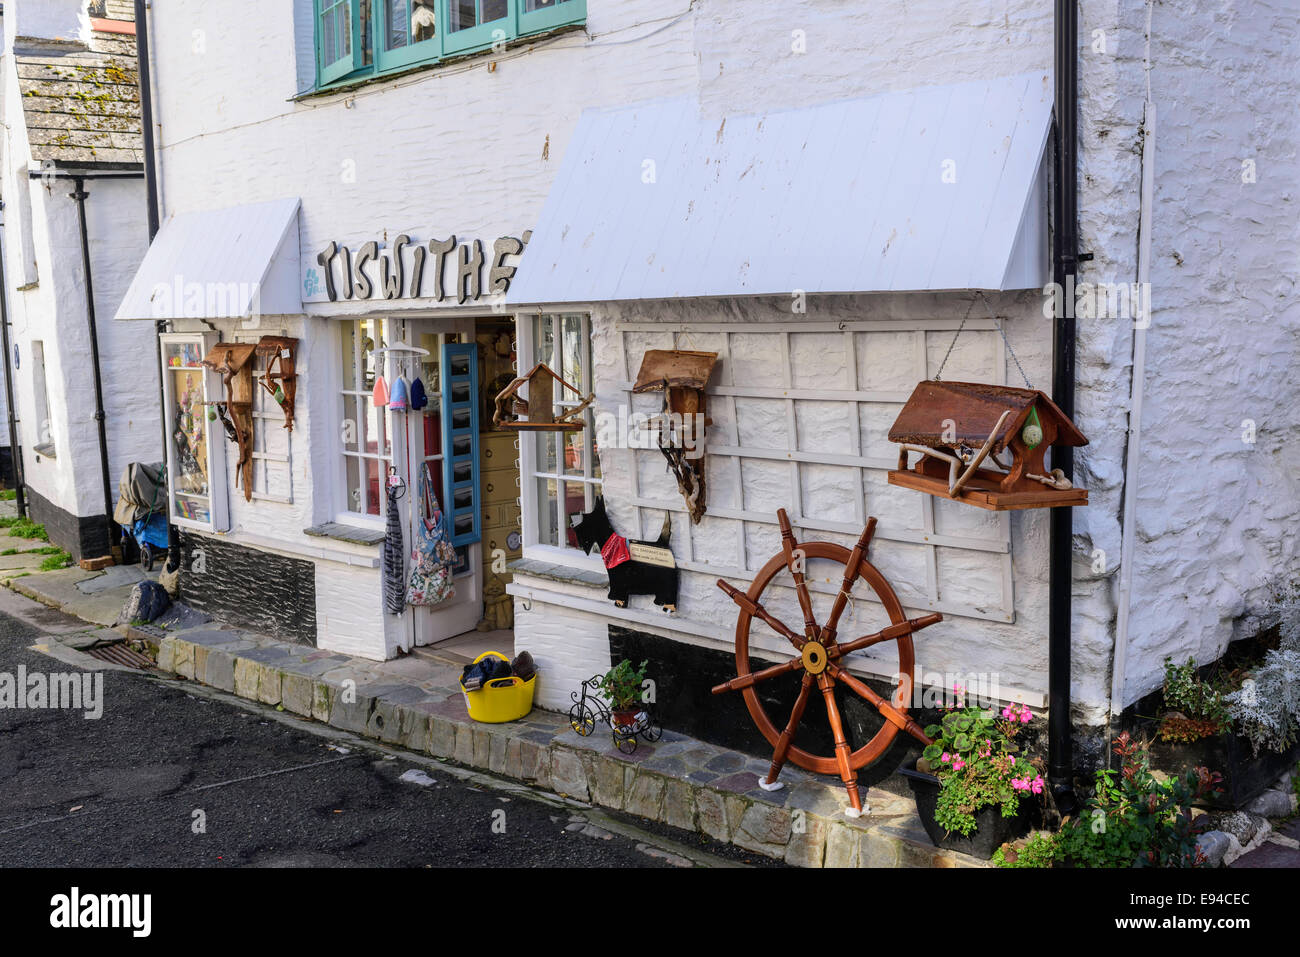 Tiswithe a collectables and bric a brack shop Polperro Cornwall UK Stock Photo